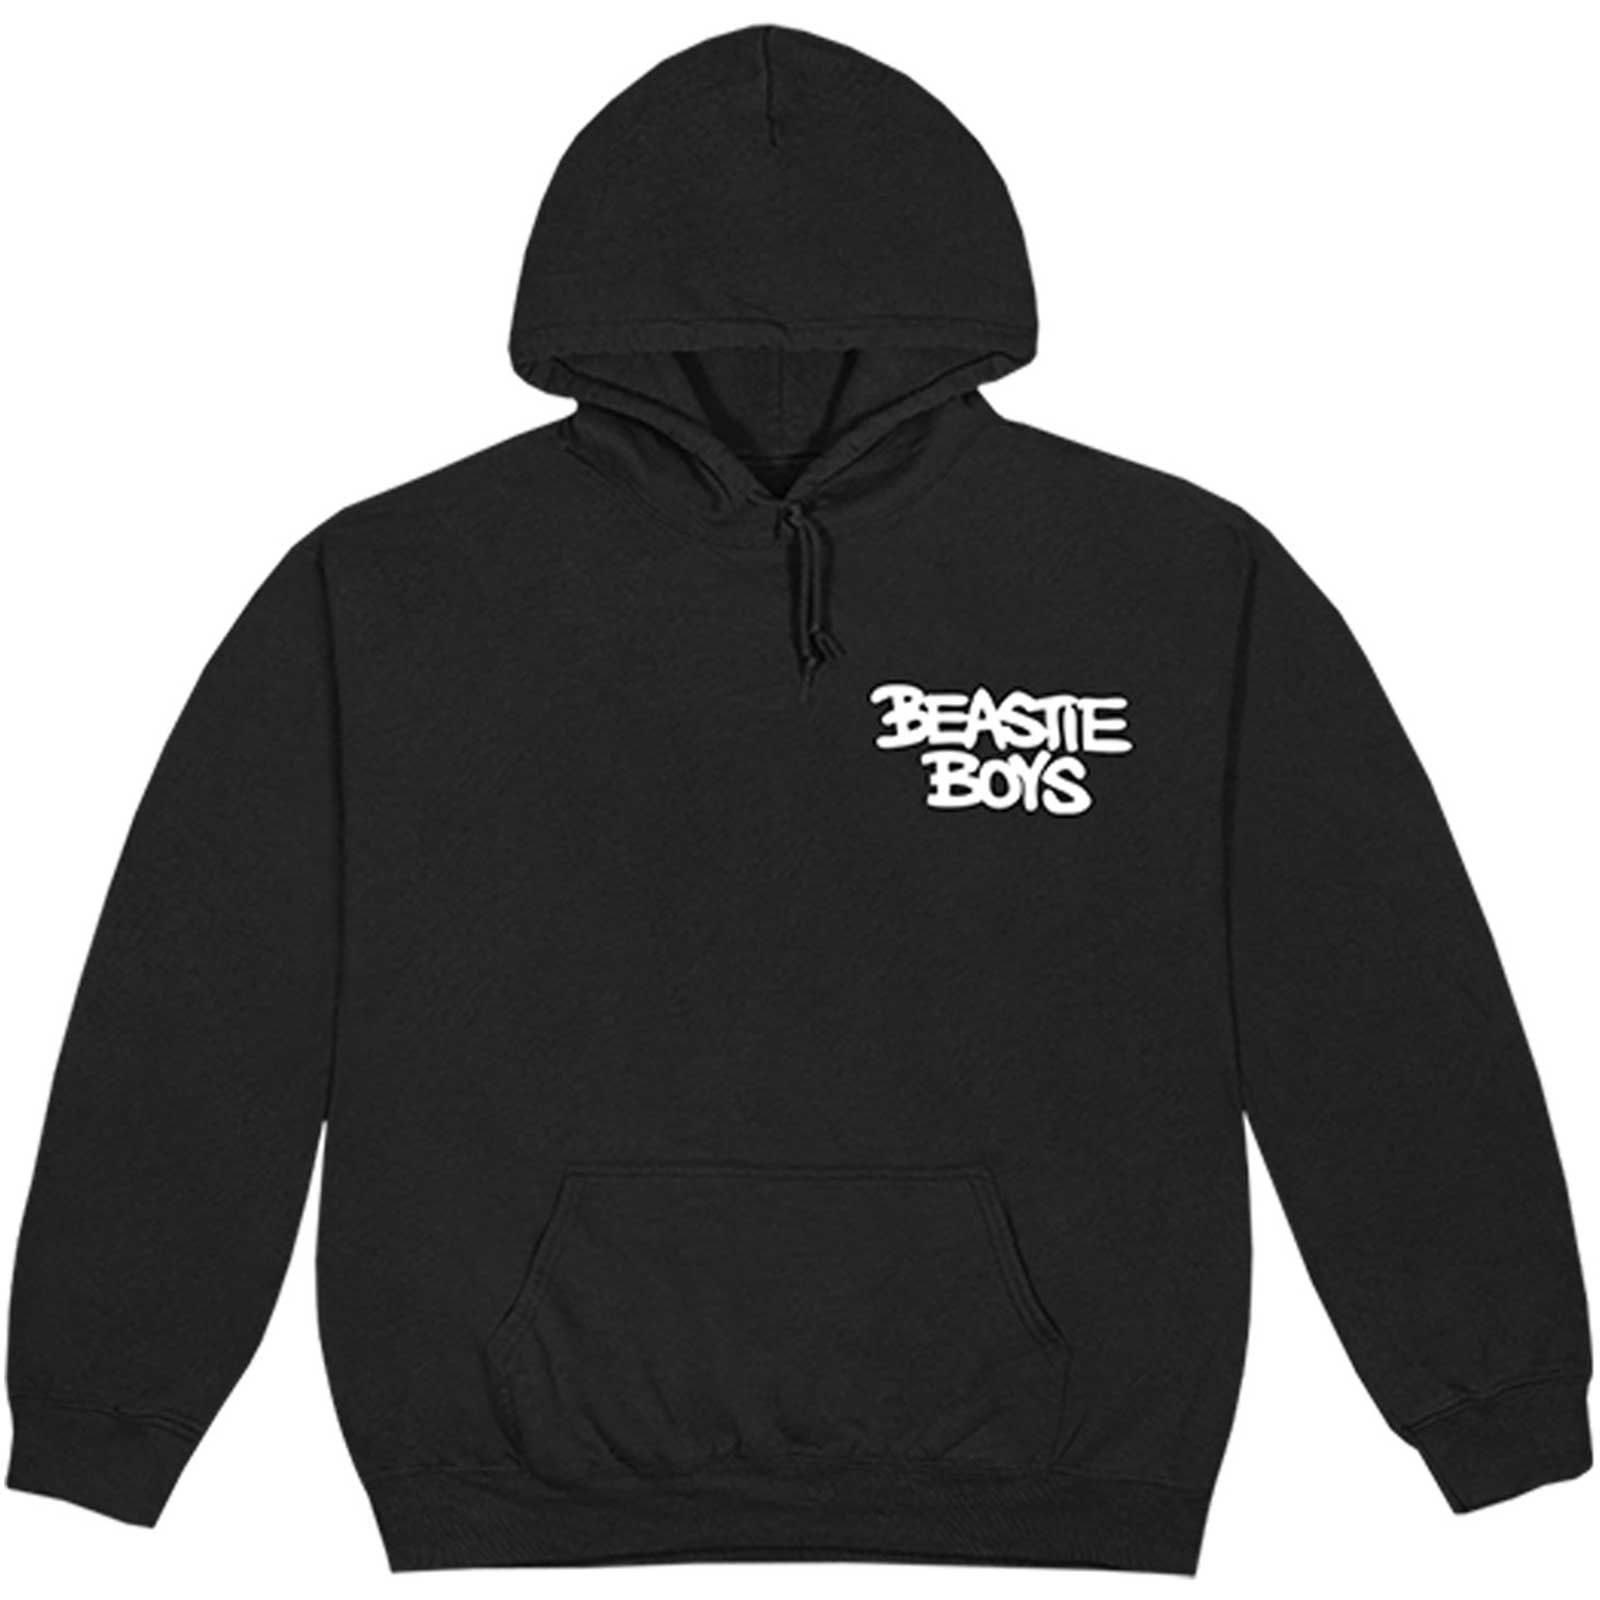 The Beastie Boys Unisex Hoodie - Check Your Head - Black Official Licensed Design